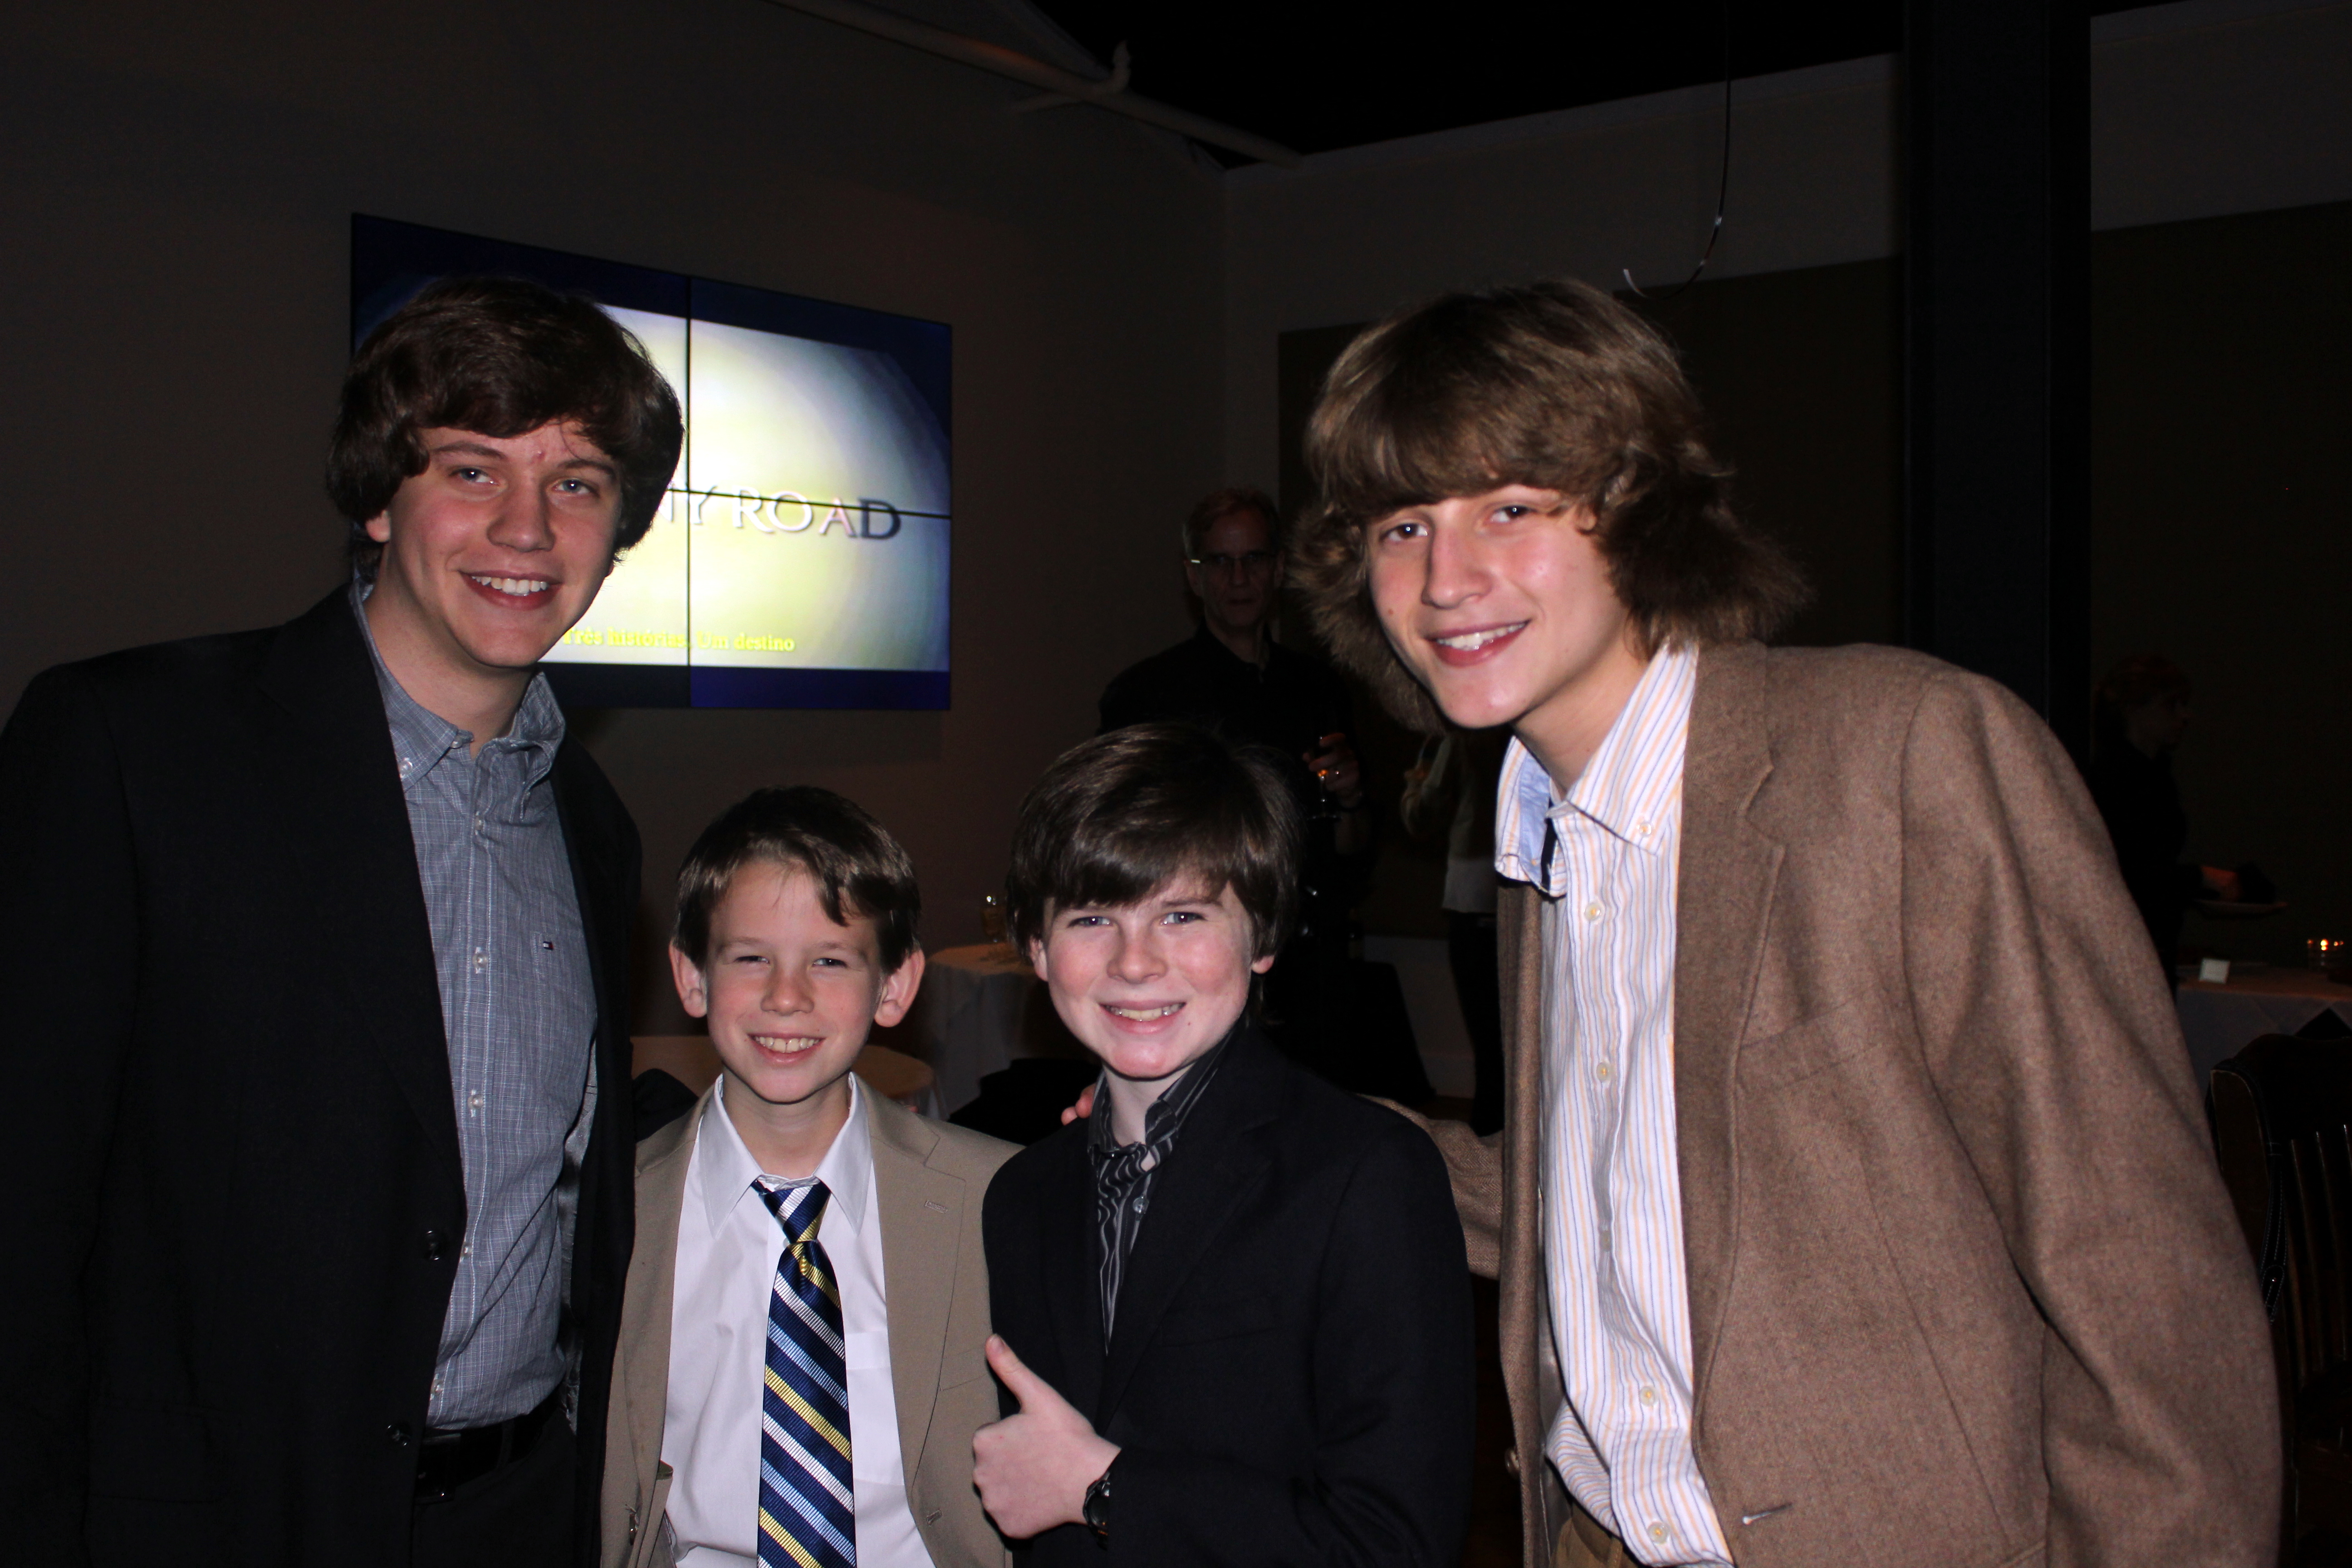 Double brothers: Ryan Williams, Grayson Riggs, Chandler Riggs and Andrew Williams at the premiere of 